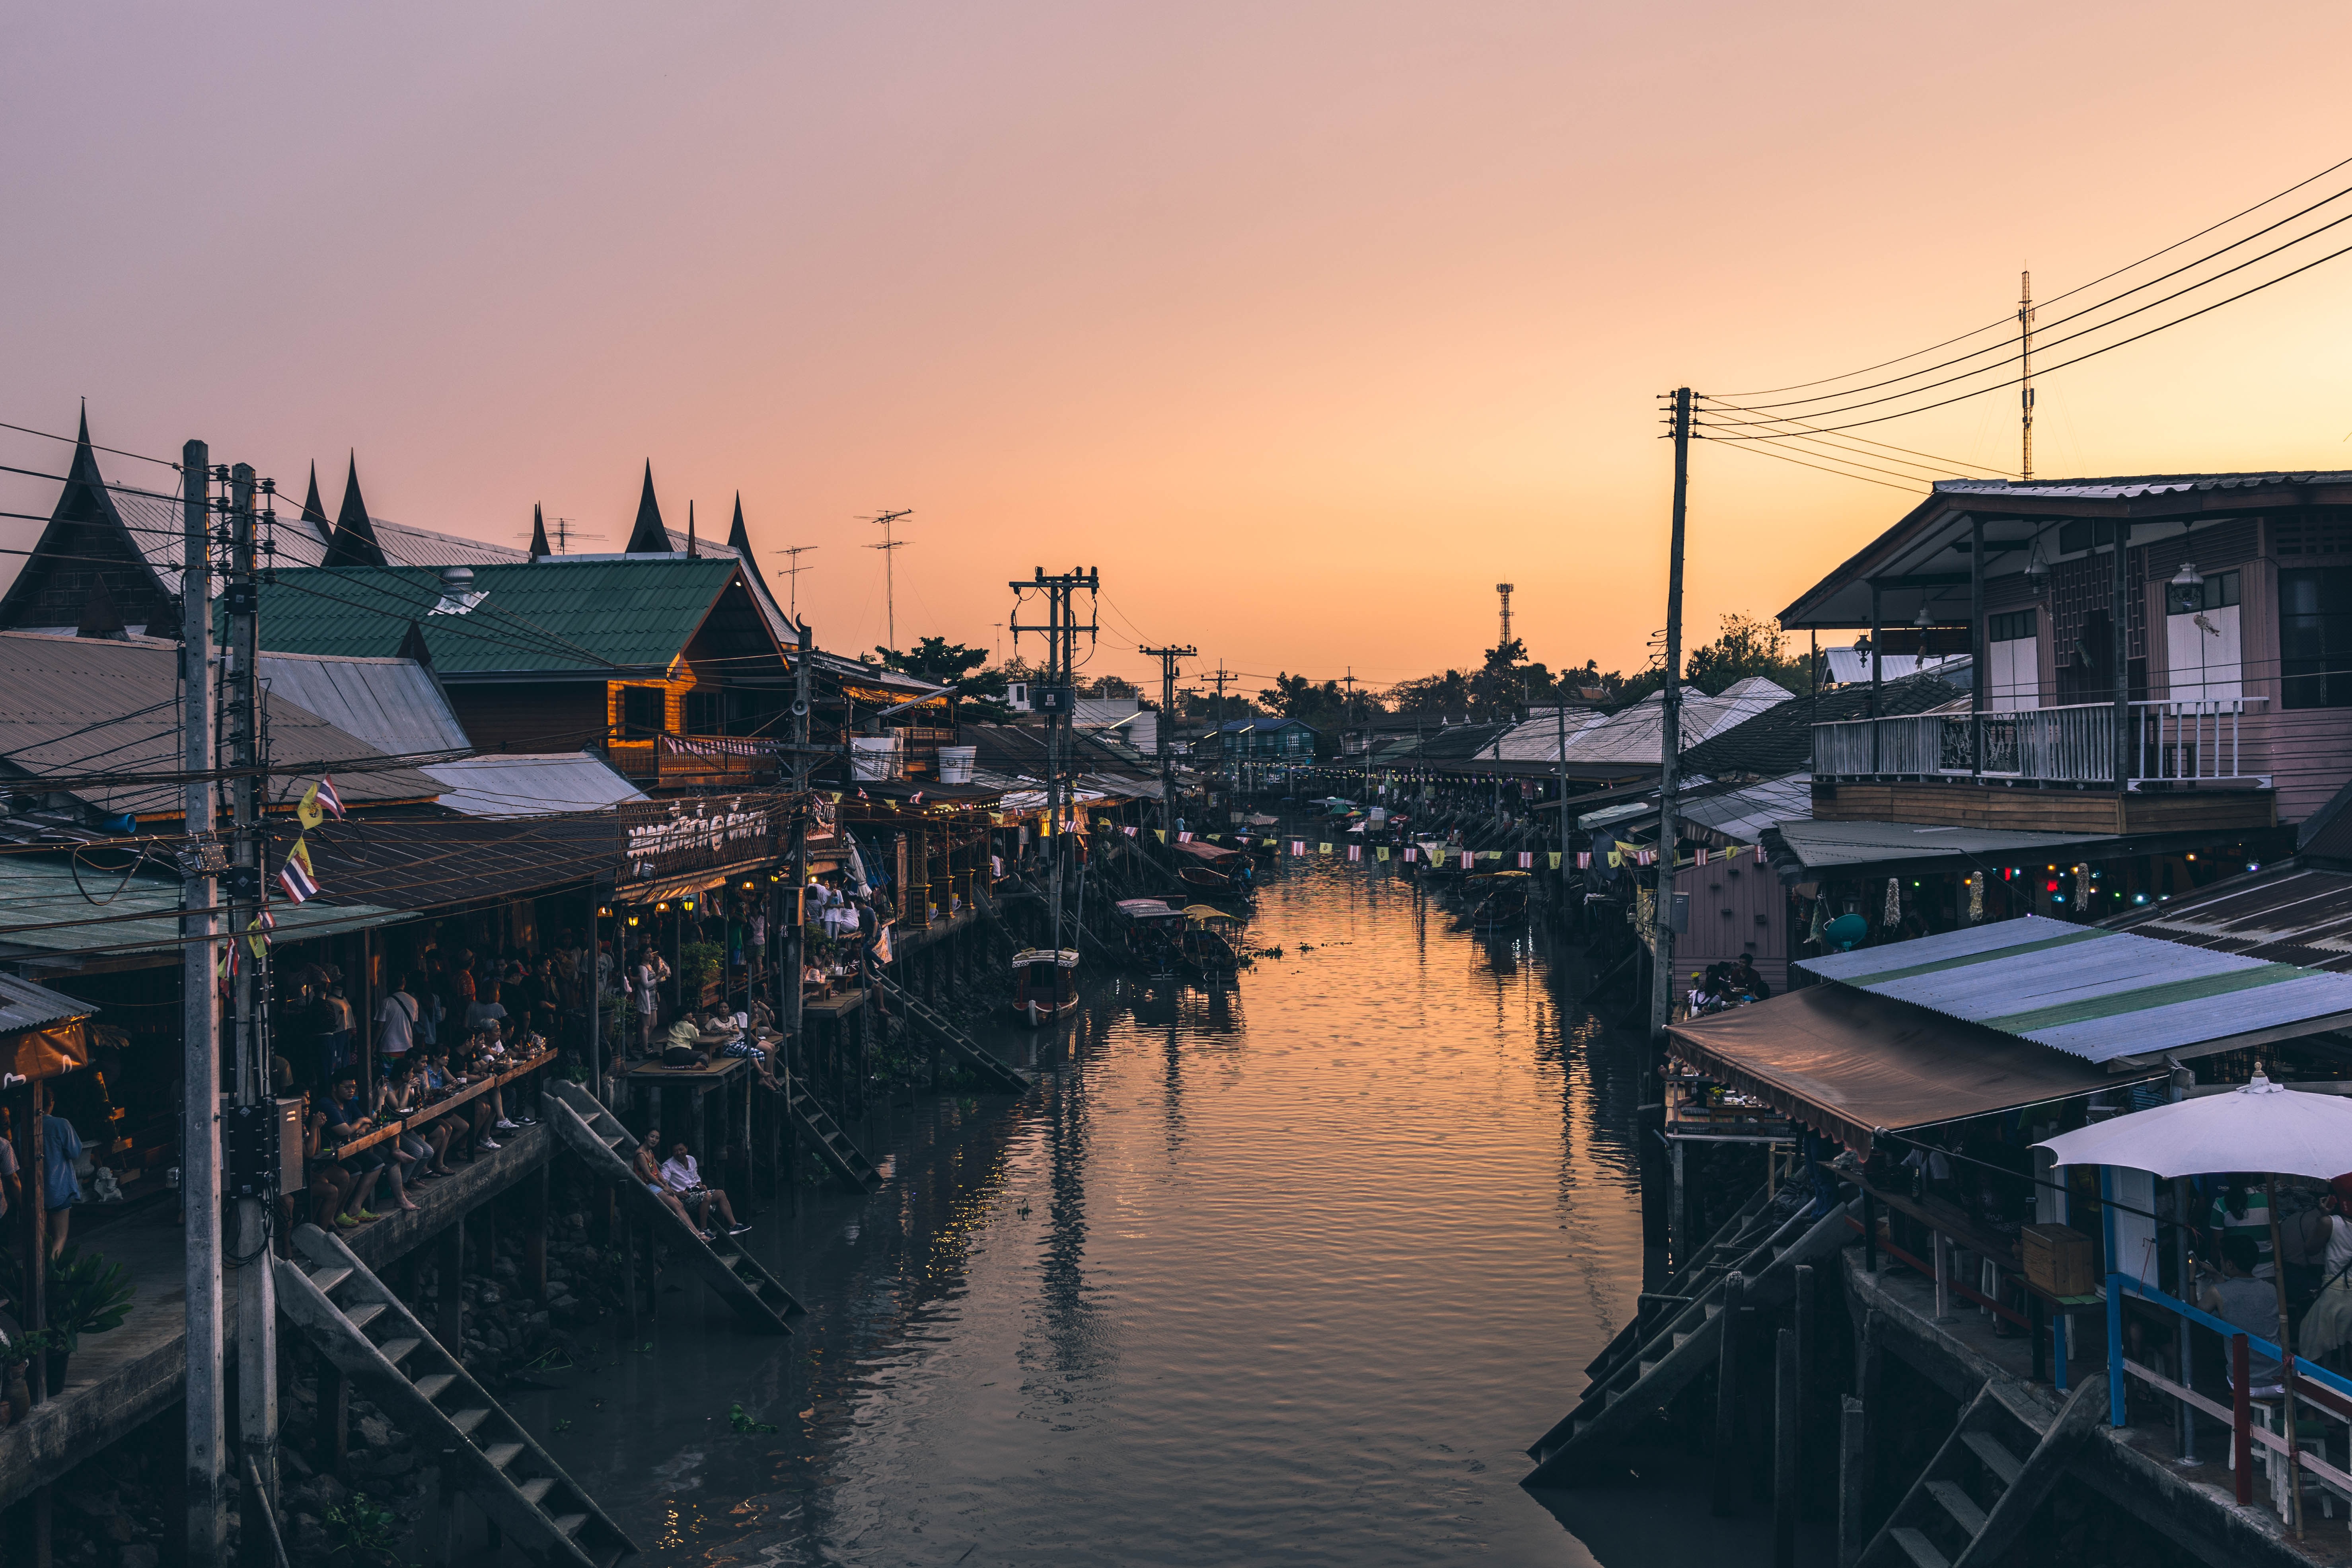 The Amphawa floating market in Samut Songkhram province, Thailand is a must-see destination for its food and natural beauty.